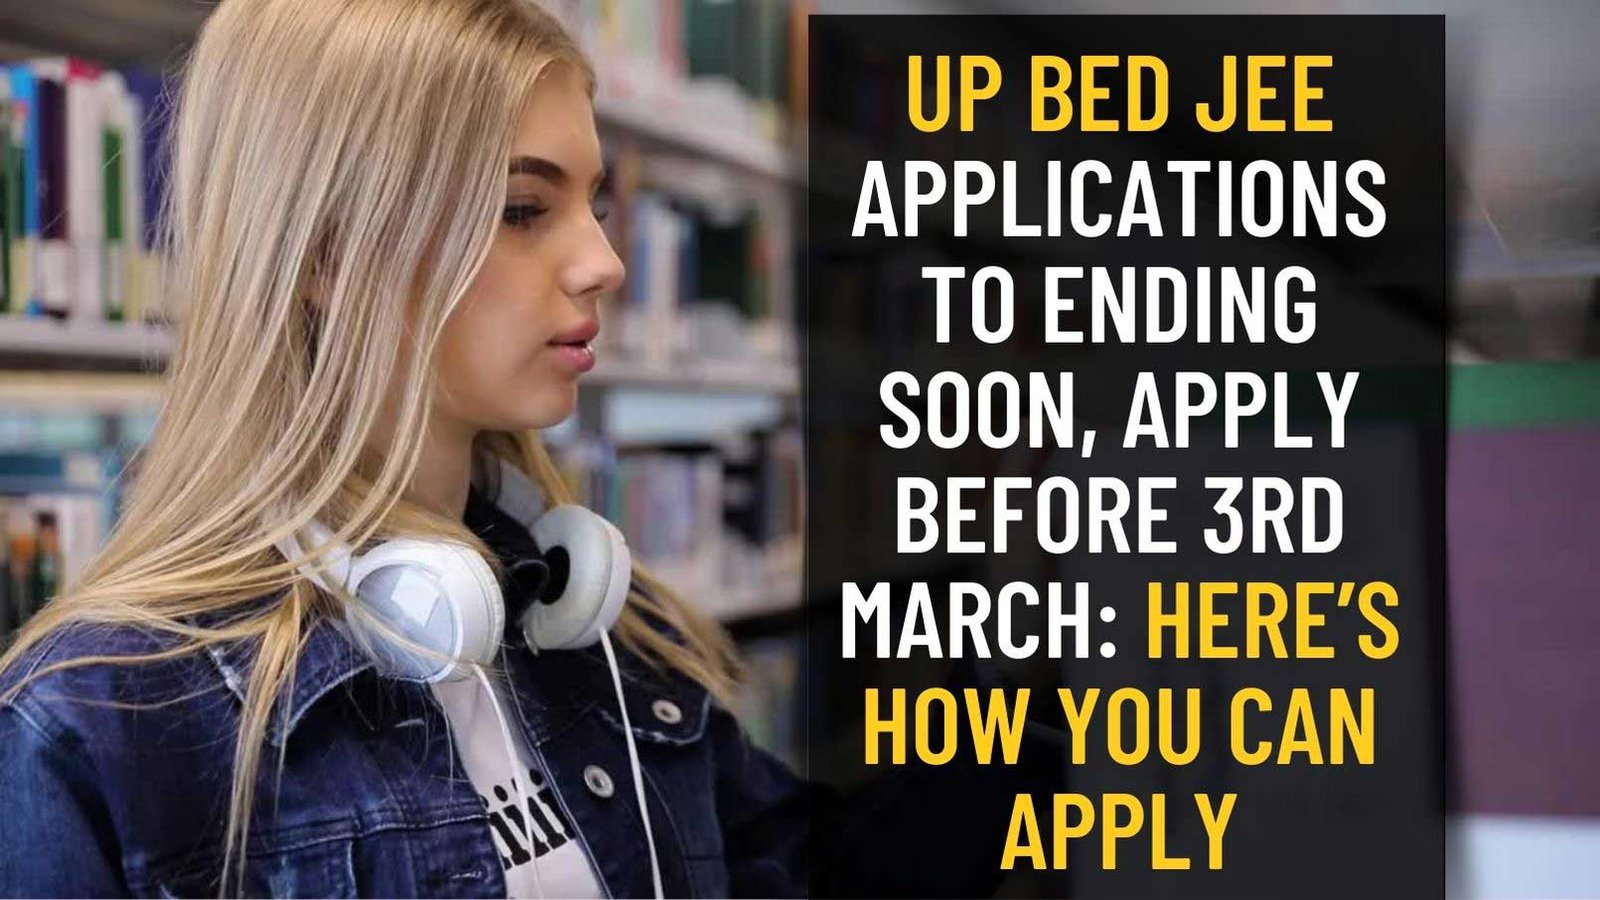 UP BEd JEE Applications To Ending Soon, Apply Before 3rd March: Here’s how you can apply 